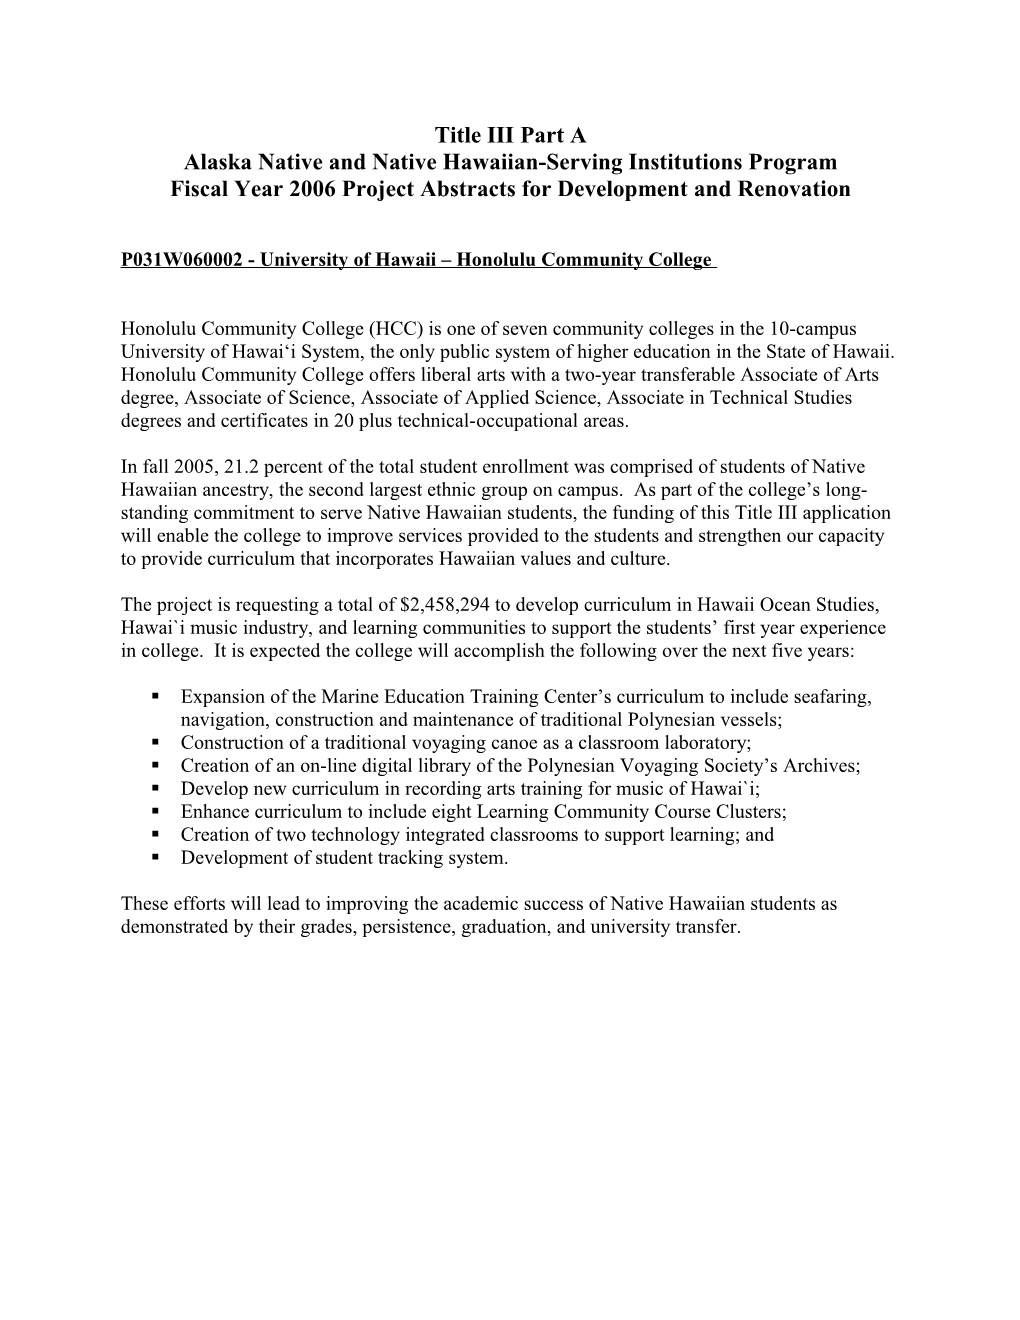 FY 2006 Project Abstracts for the Alaska Native and Native Hawaiian-Serving Institutions